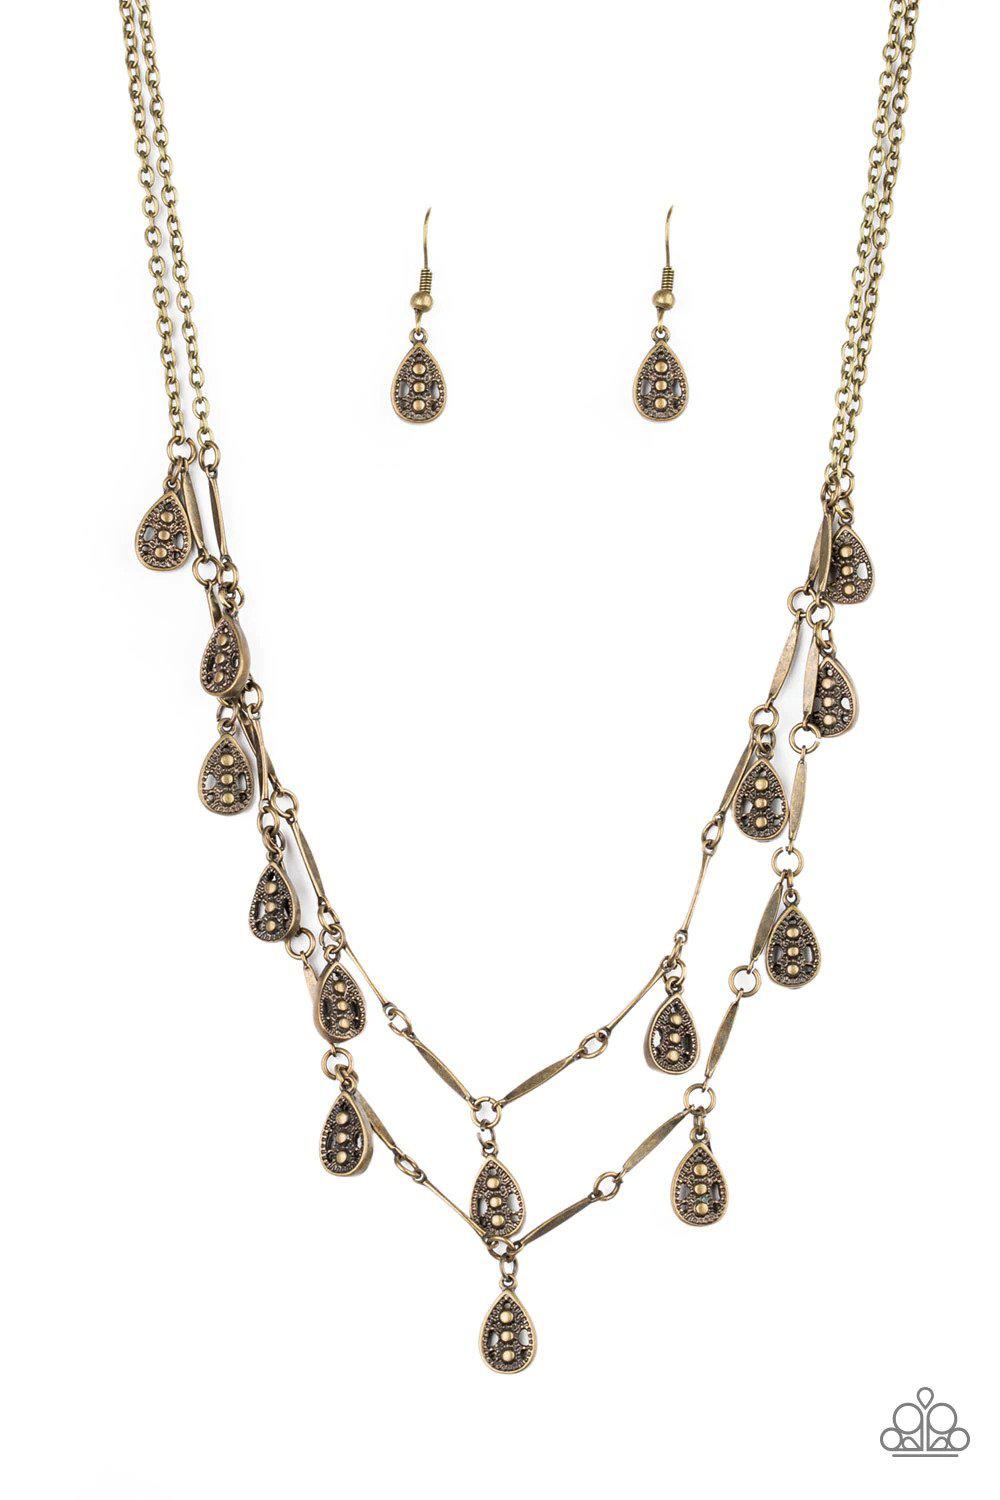 Galapagos Gypsy Brass Necklace - Paparazzi Accessories- lightbox - CarasShop.com - $5 Jewelry by Cara Jewels